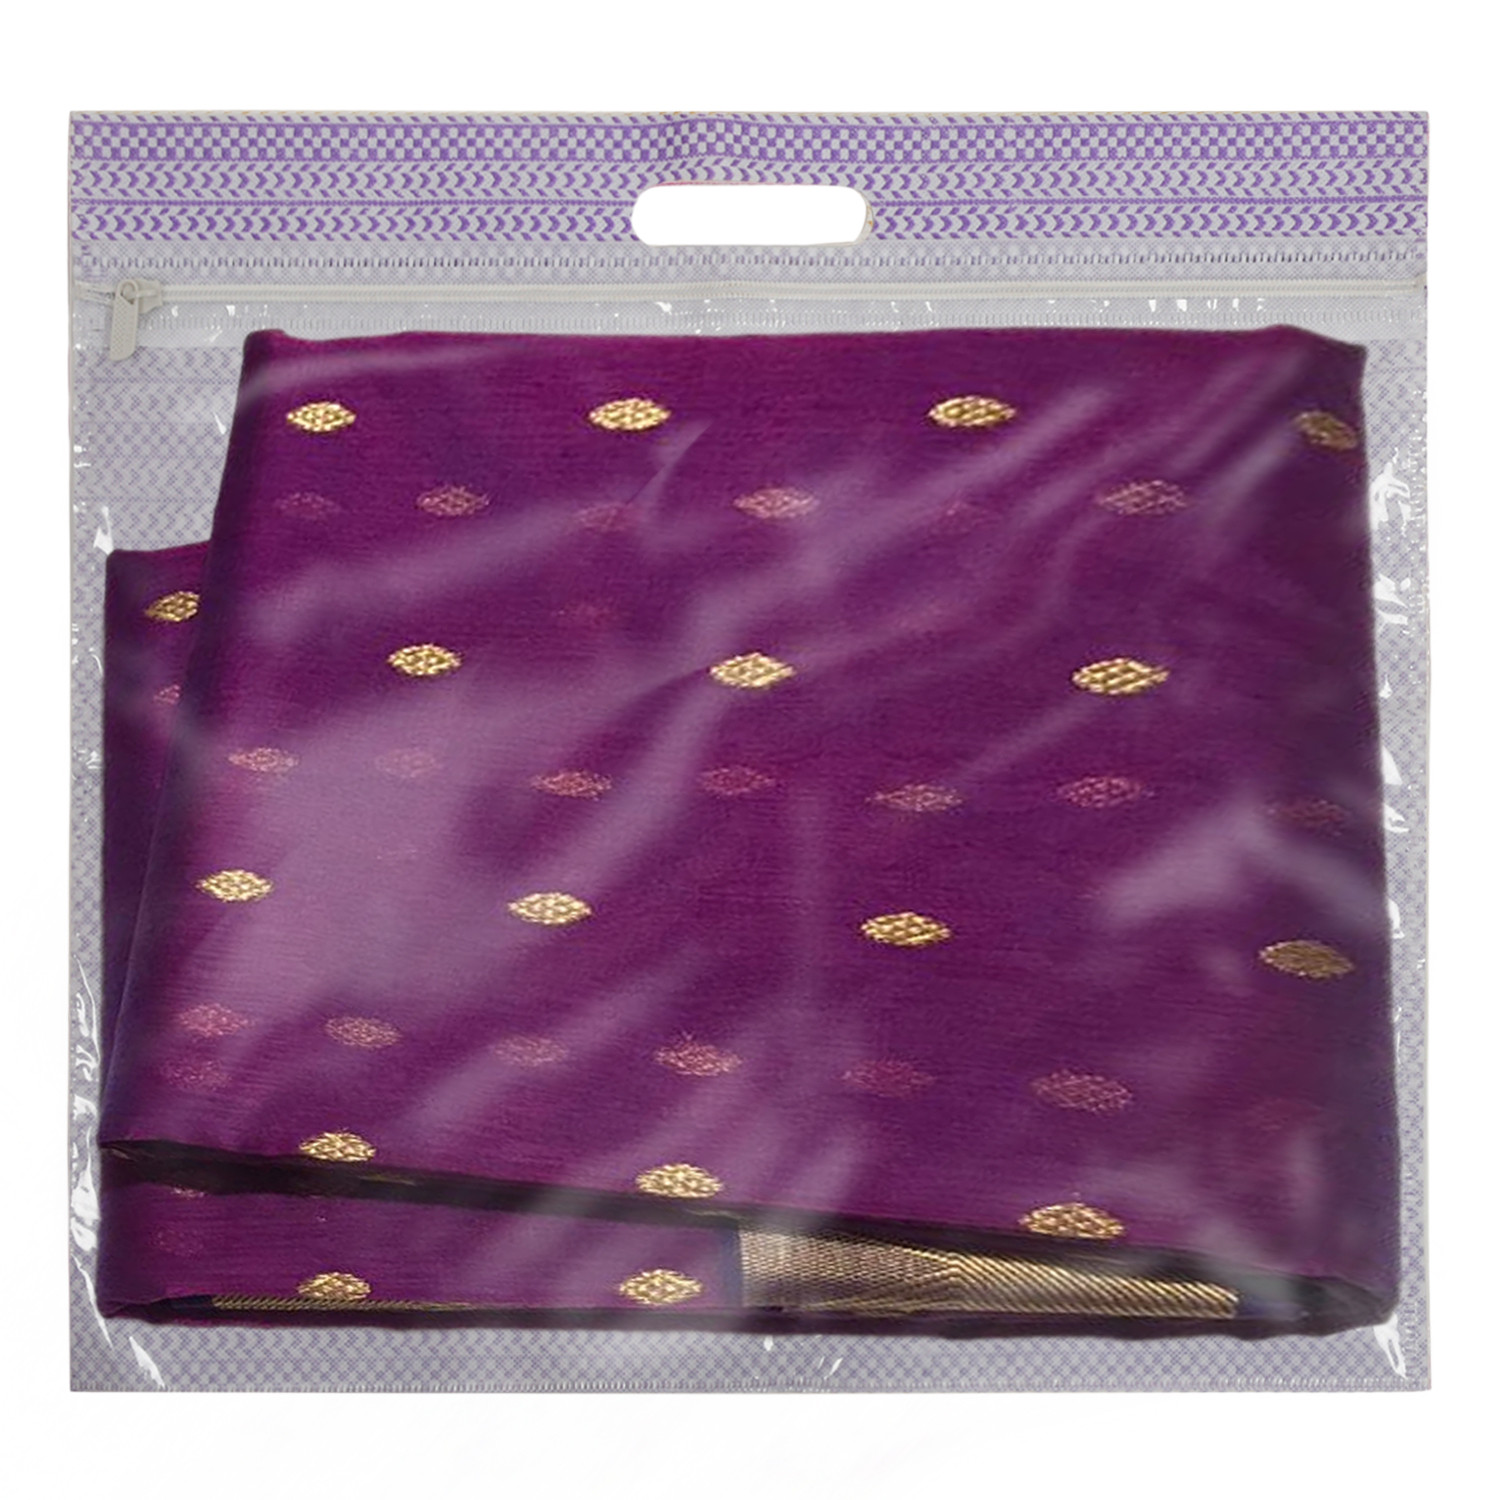 Kuber Industries Non-Woven Single Saree Covers With Transparent Window With Handle Pack of 6 (Purple & Pink)